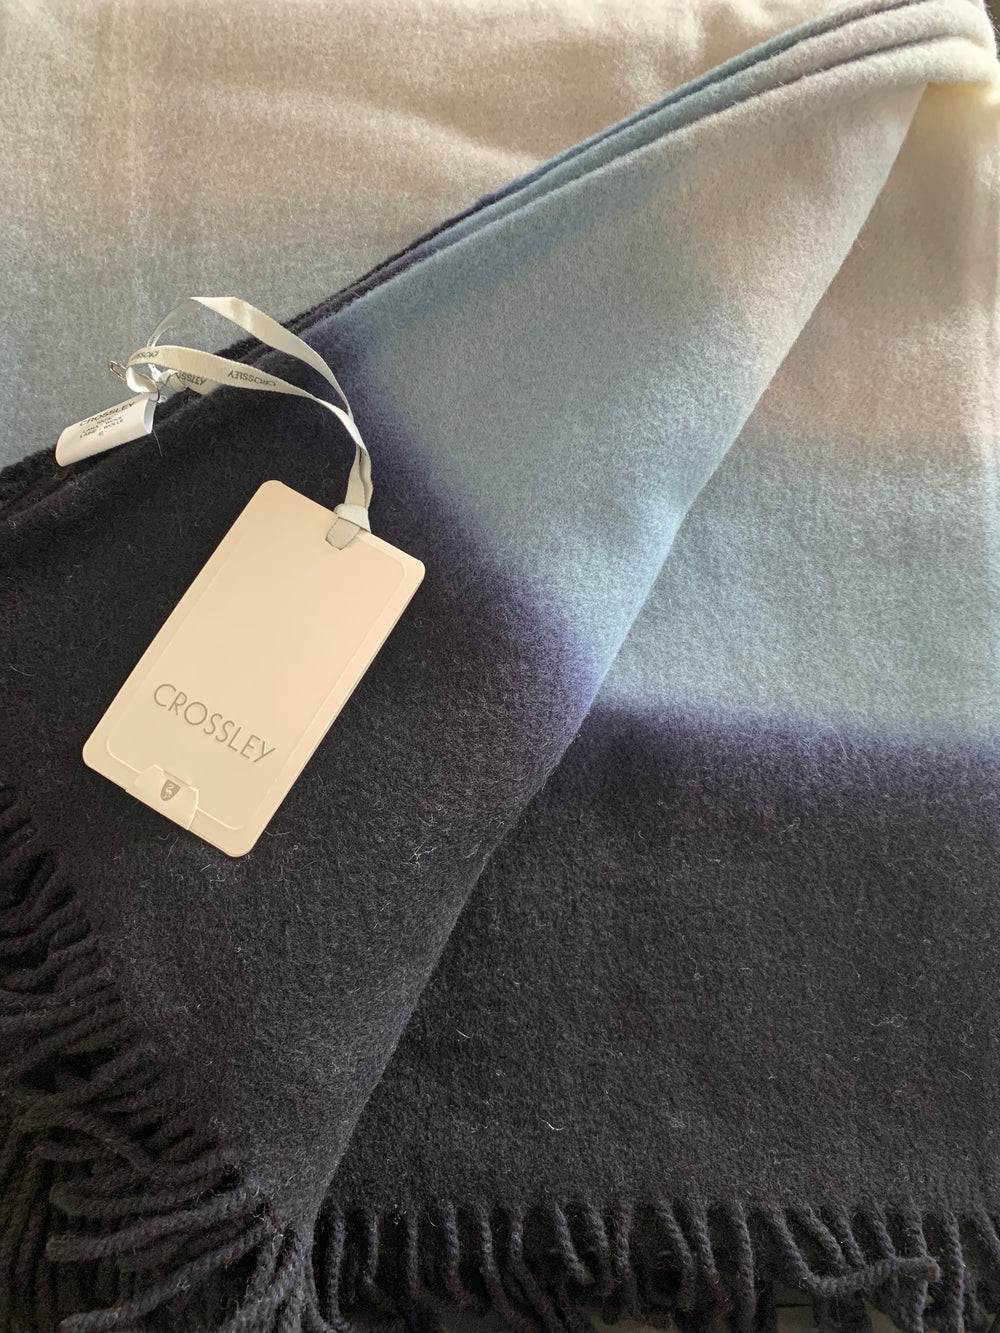 Crossley - Plaid in Grey and Light Blue | Buster McGee Daylesford